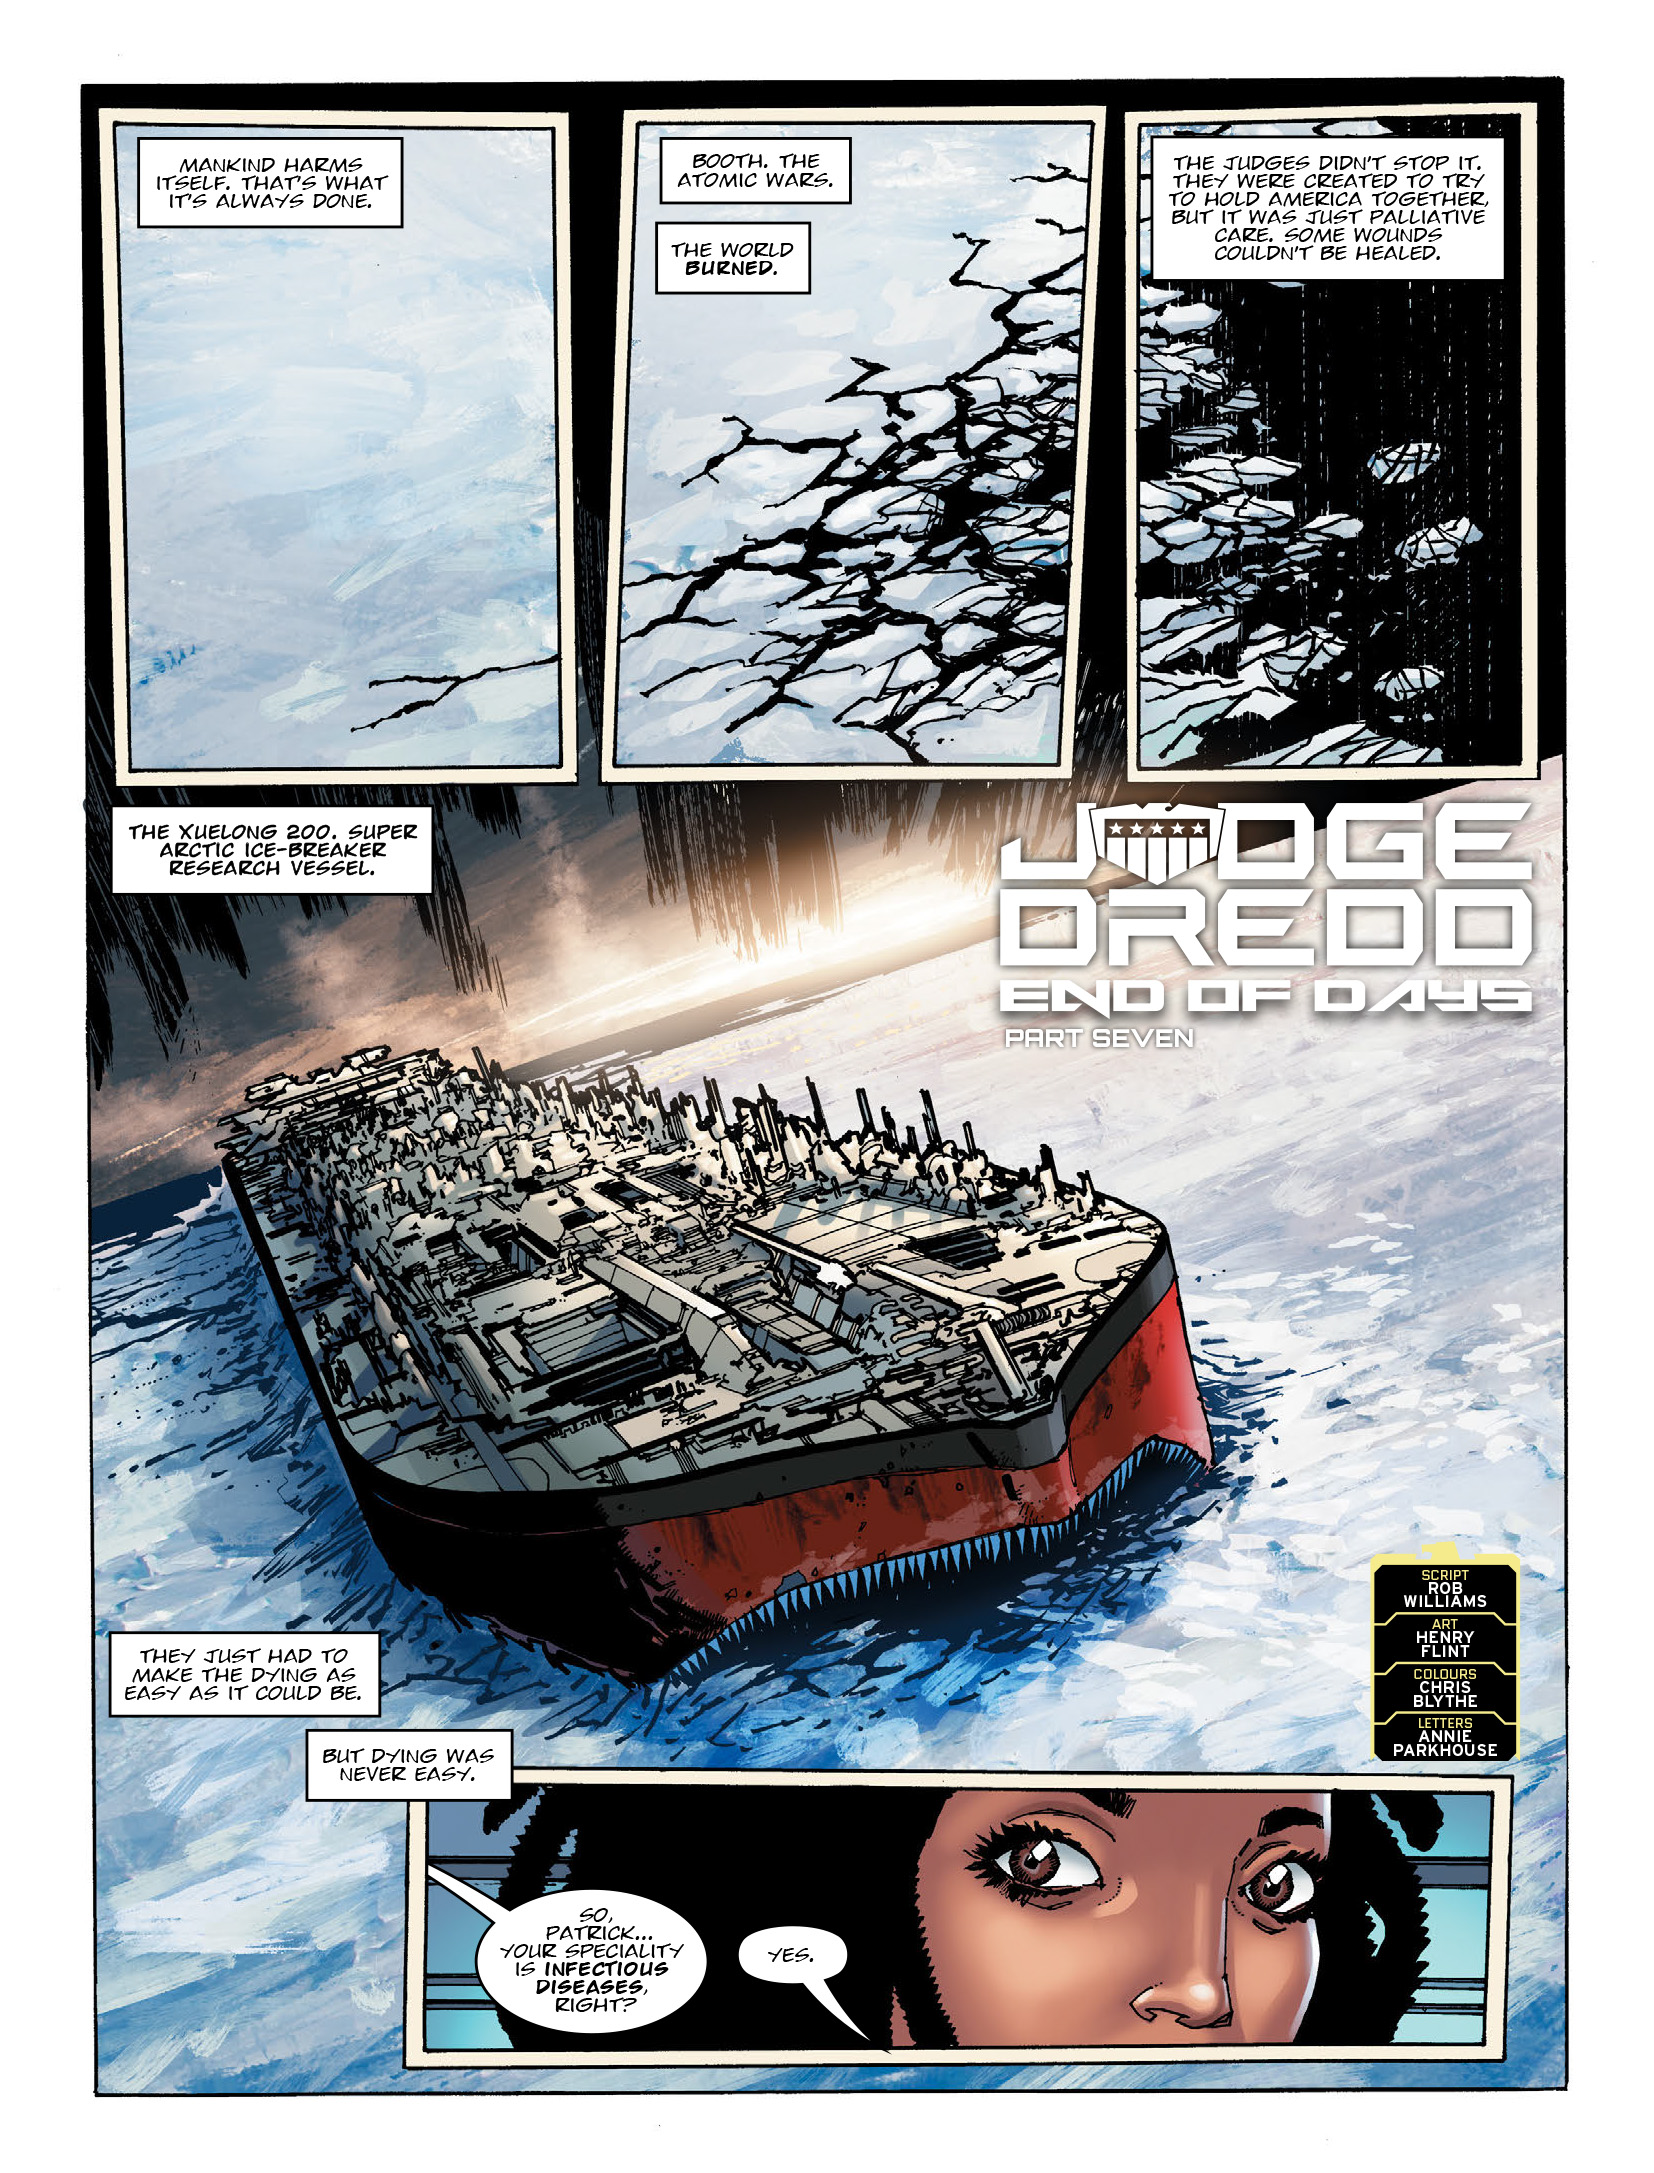 2000 AD: Chapter 2190 - Page 3